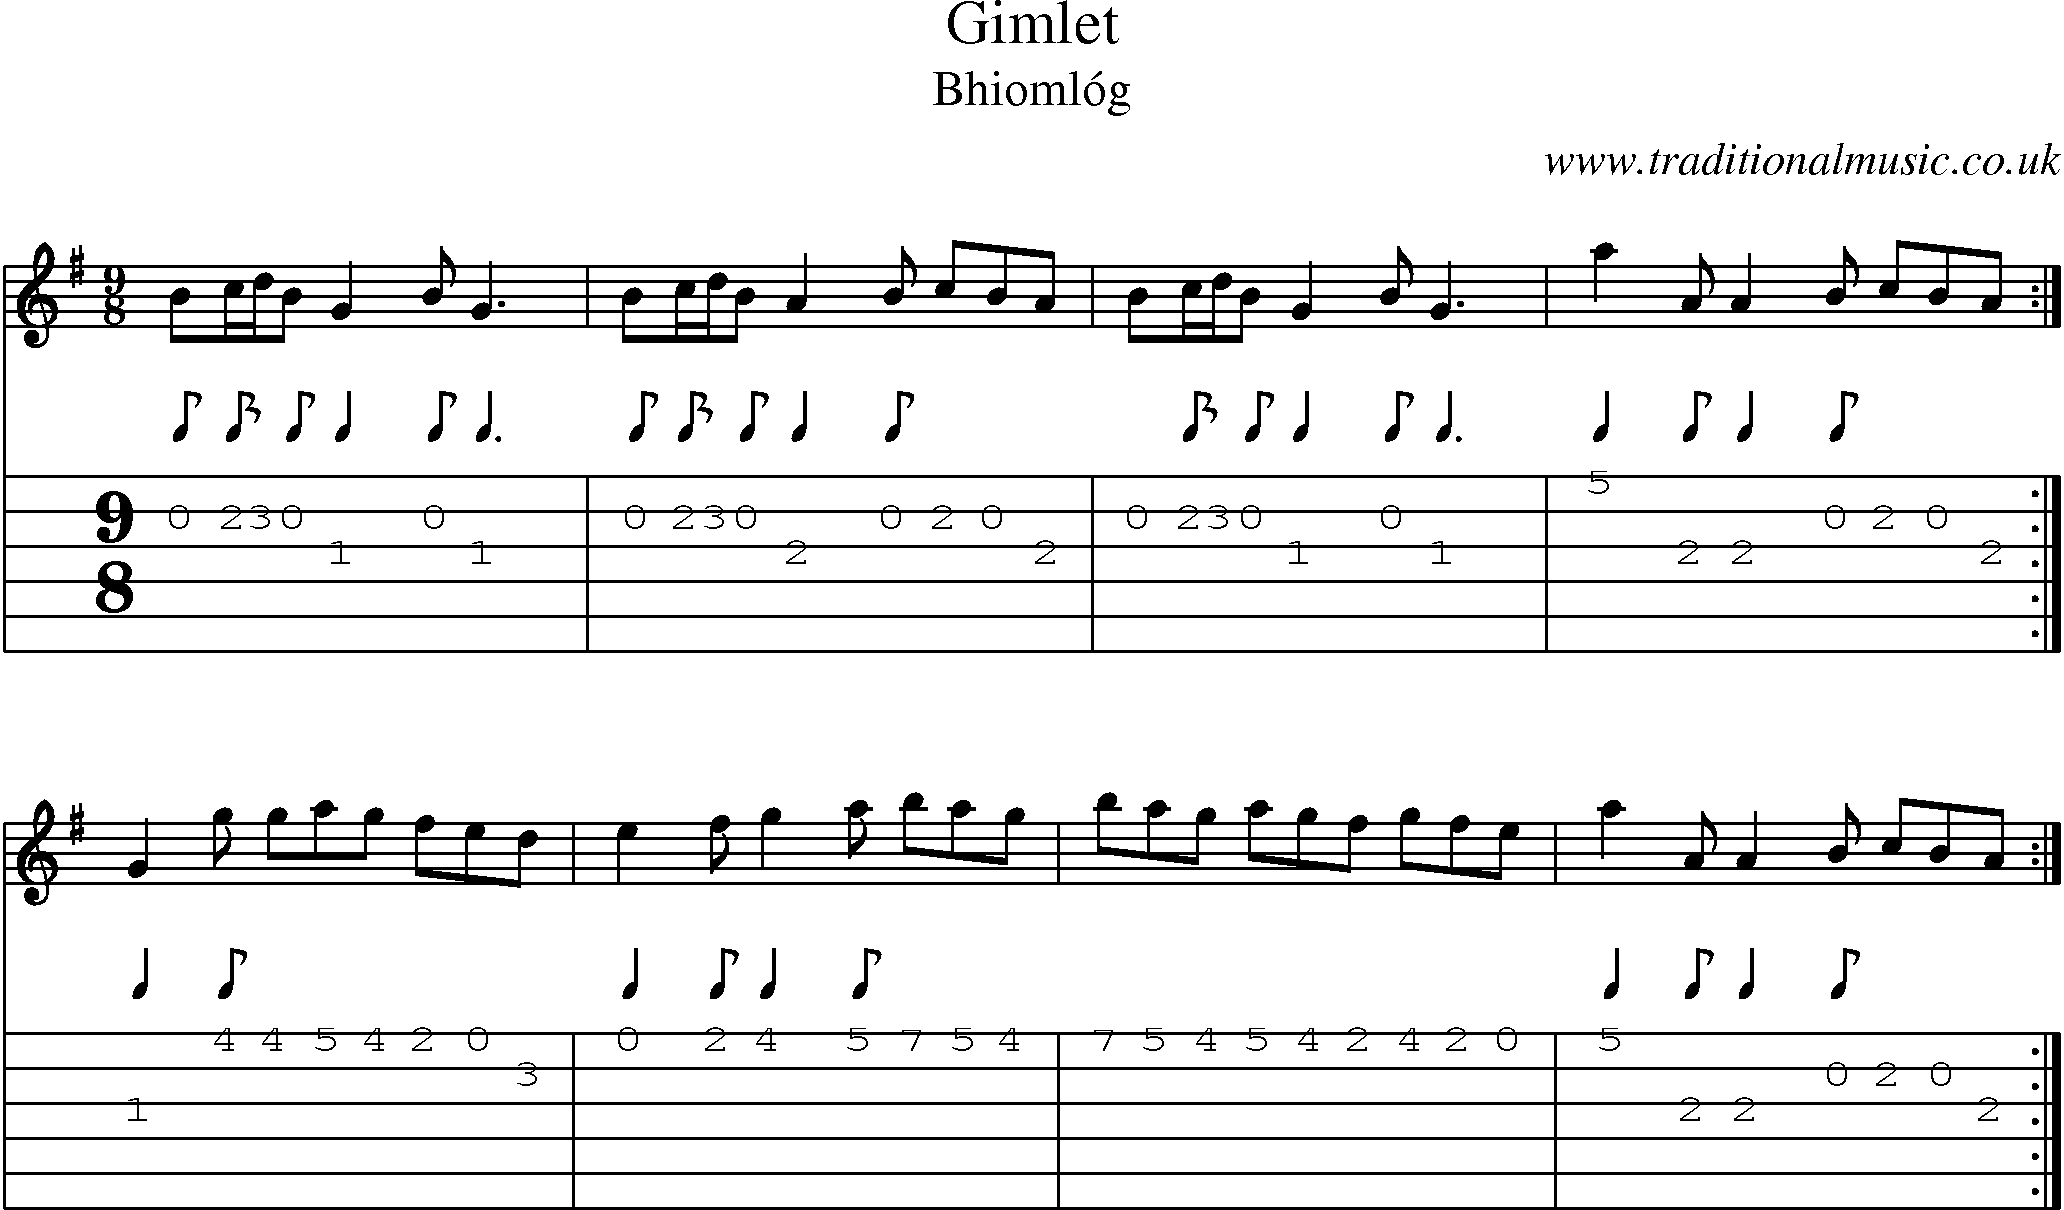 Music Score and Guitar Tabs for Gimlet